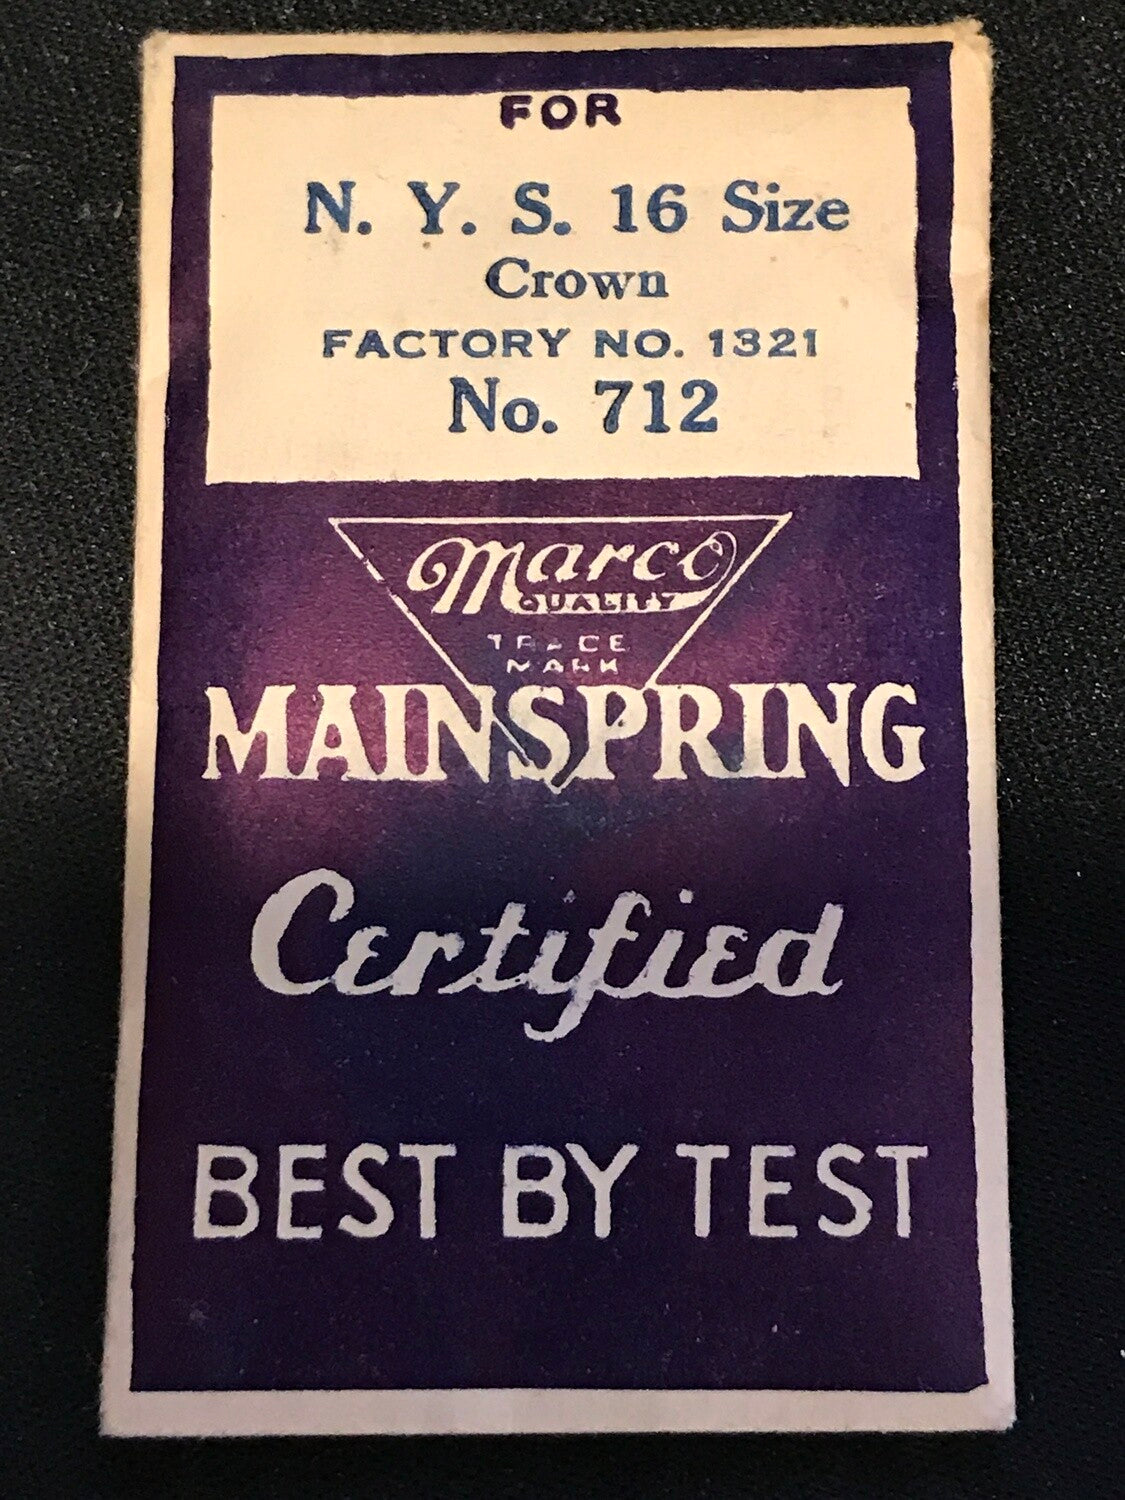 Marco Mainspring #712 for 16s N.Y. Standard Factory No. 1321 - Steel